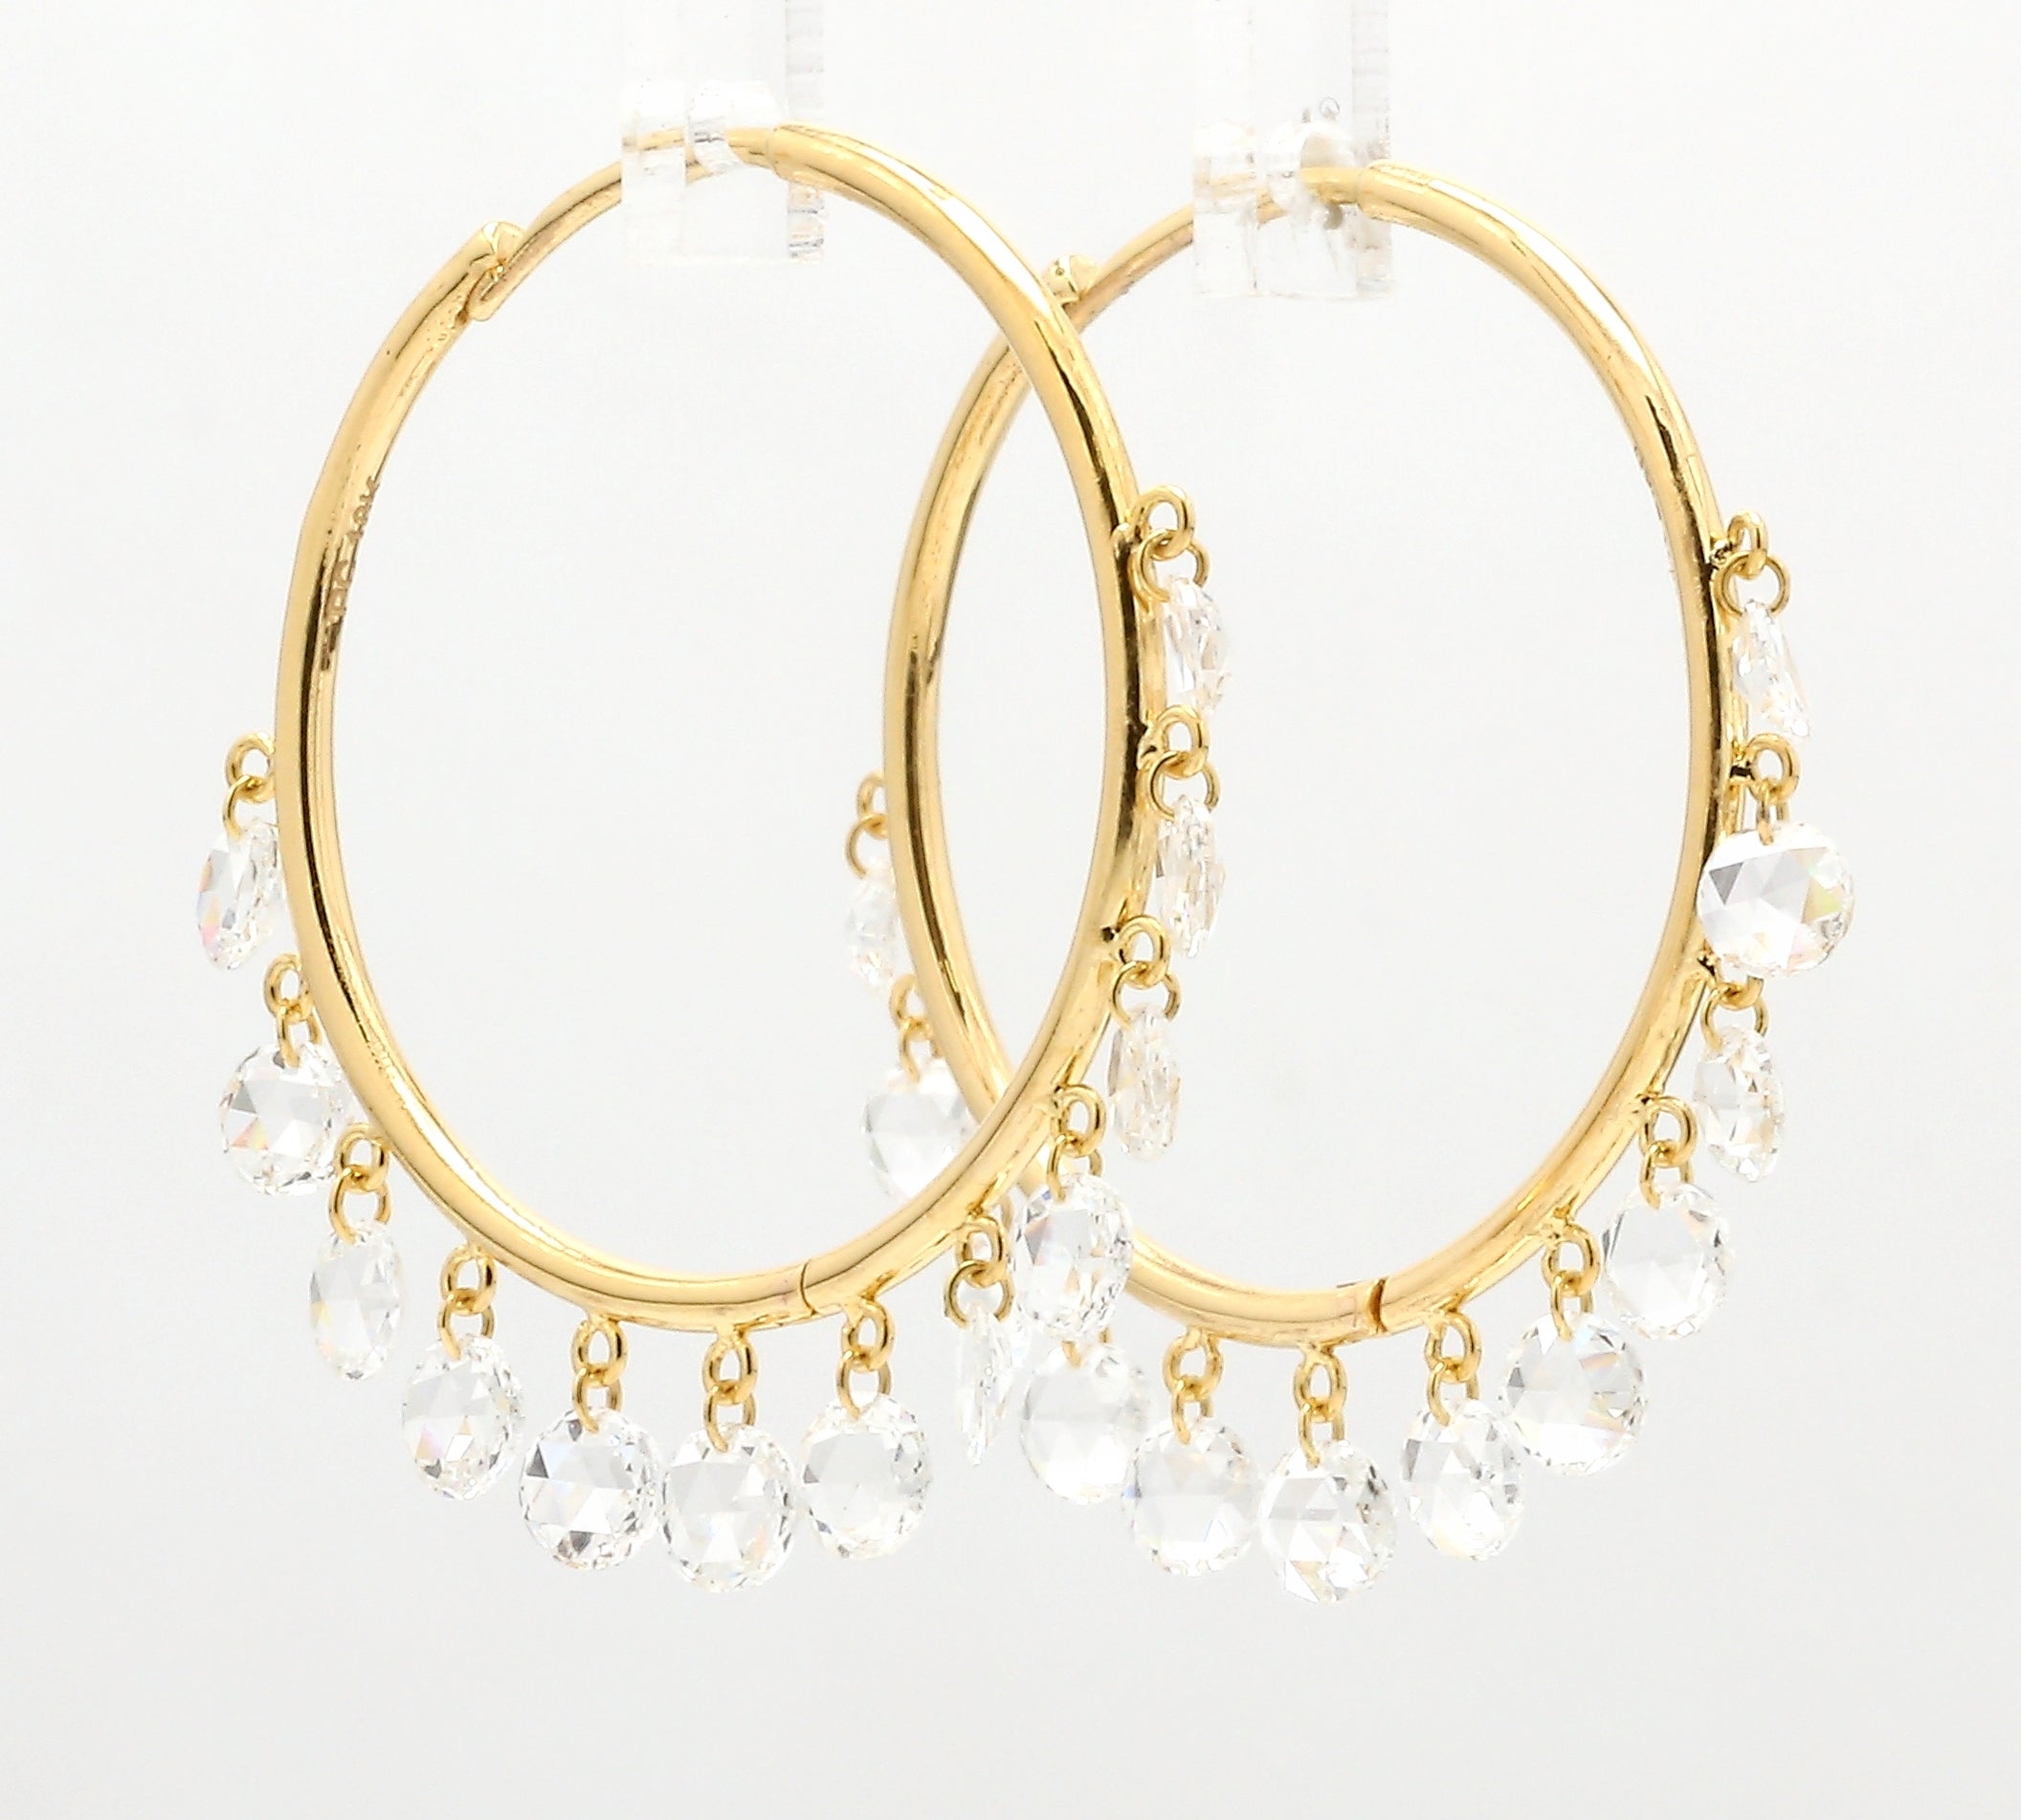 PANIM Diamond Rosecut Hoop 18k Yellow Gold Earrings

Change it up with this Panim Diamond Rosecut hoop instead of a traditional gold hoop or an all-diamond hoop. For a fresh look, this contemporary version features 24 round shape rosecut diamonds